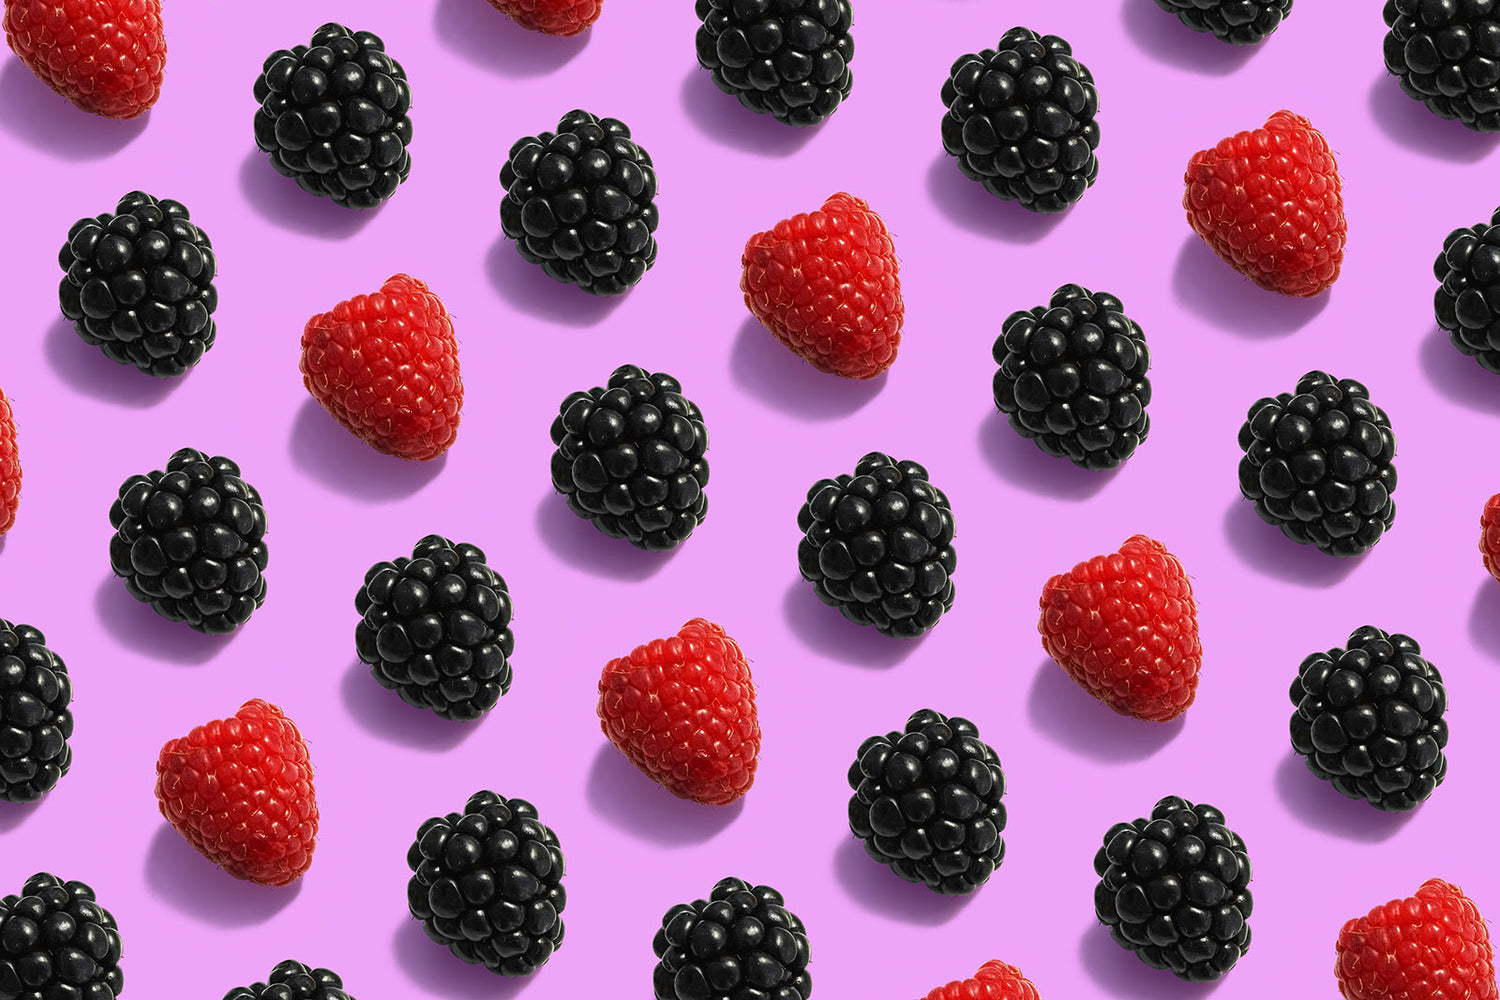 Bright stylized image with blackberries and raspberries arranged in a pattern that fills the image on a bright fuchsia background